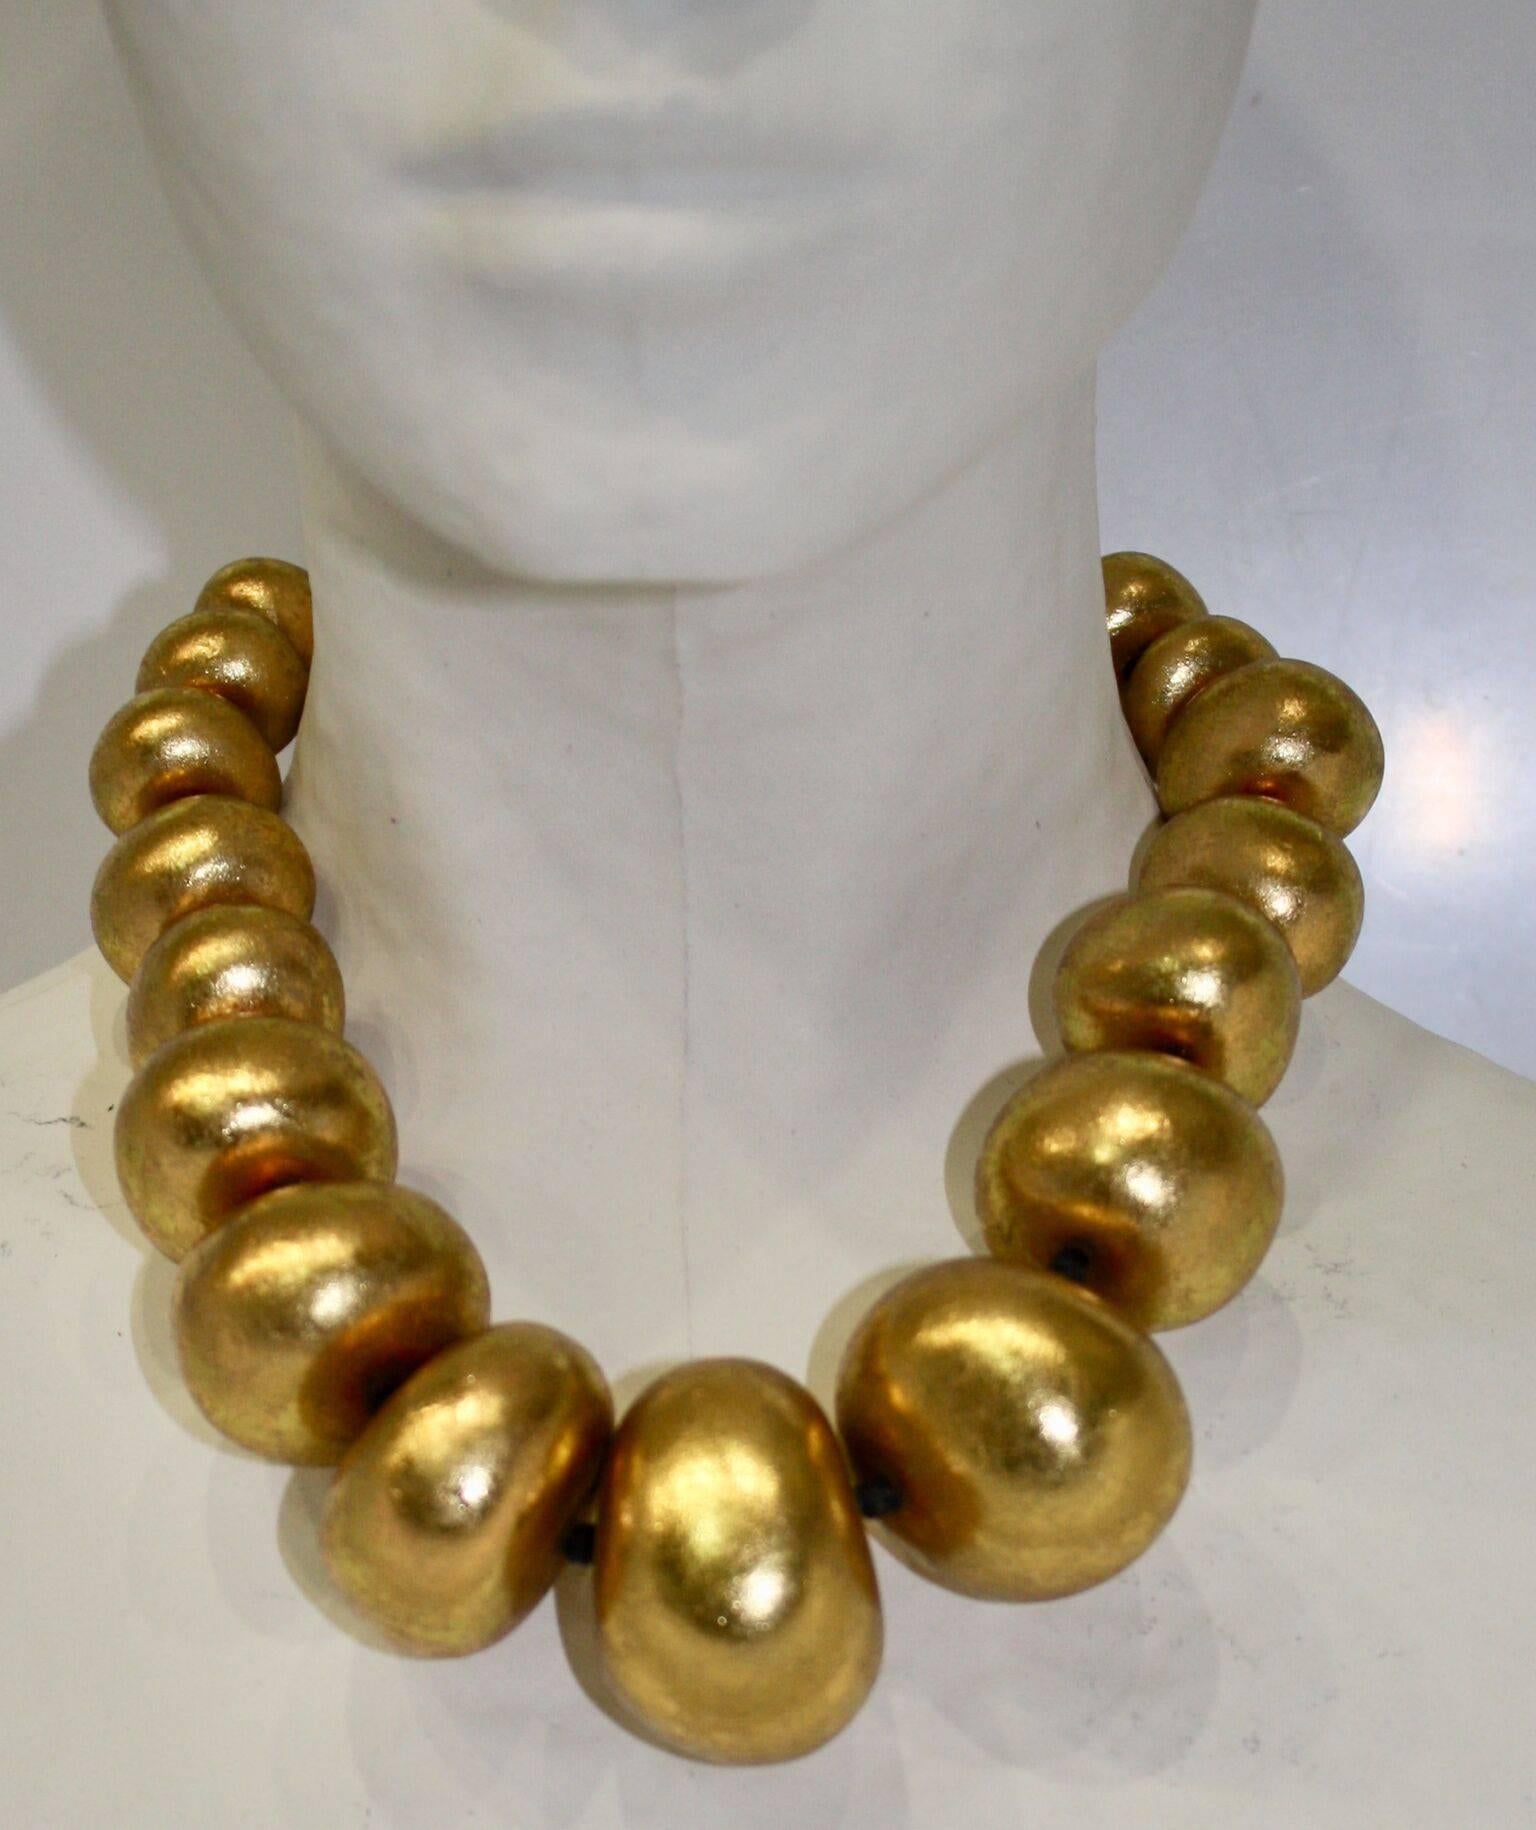 Graduating size ball gold leaf coated wood choker necklace from Monies.  Smallest ball is 1.5